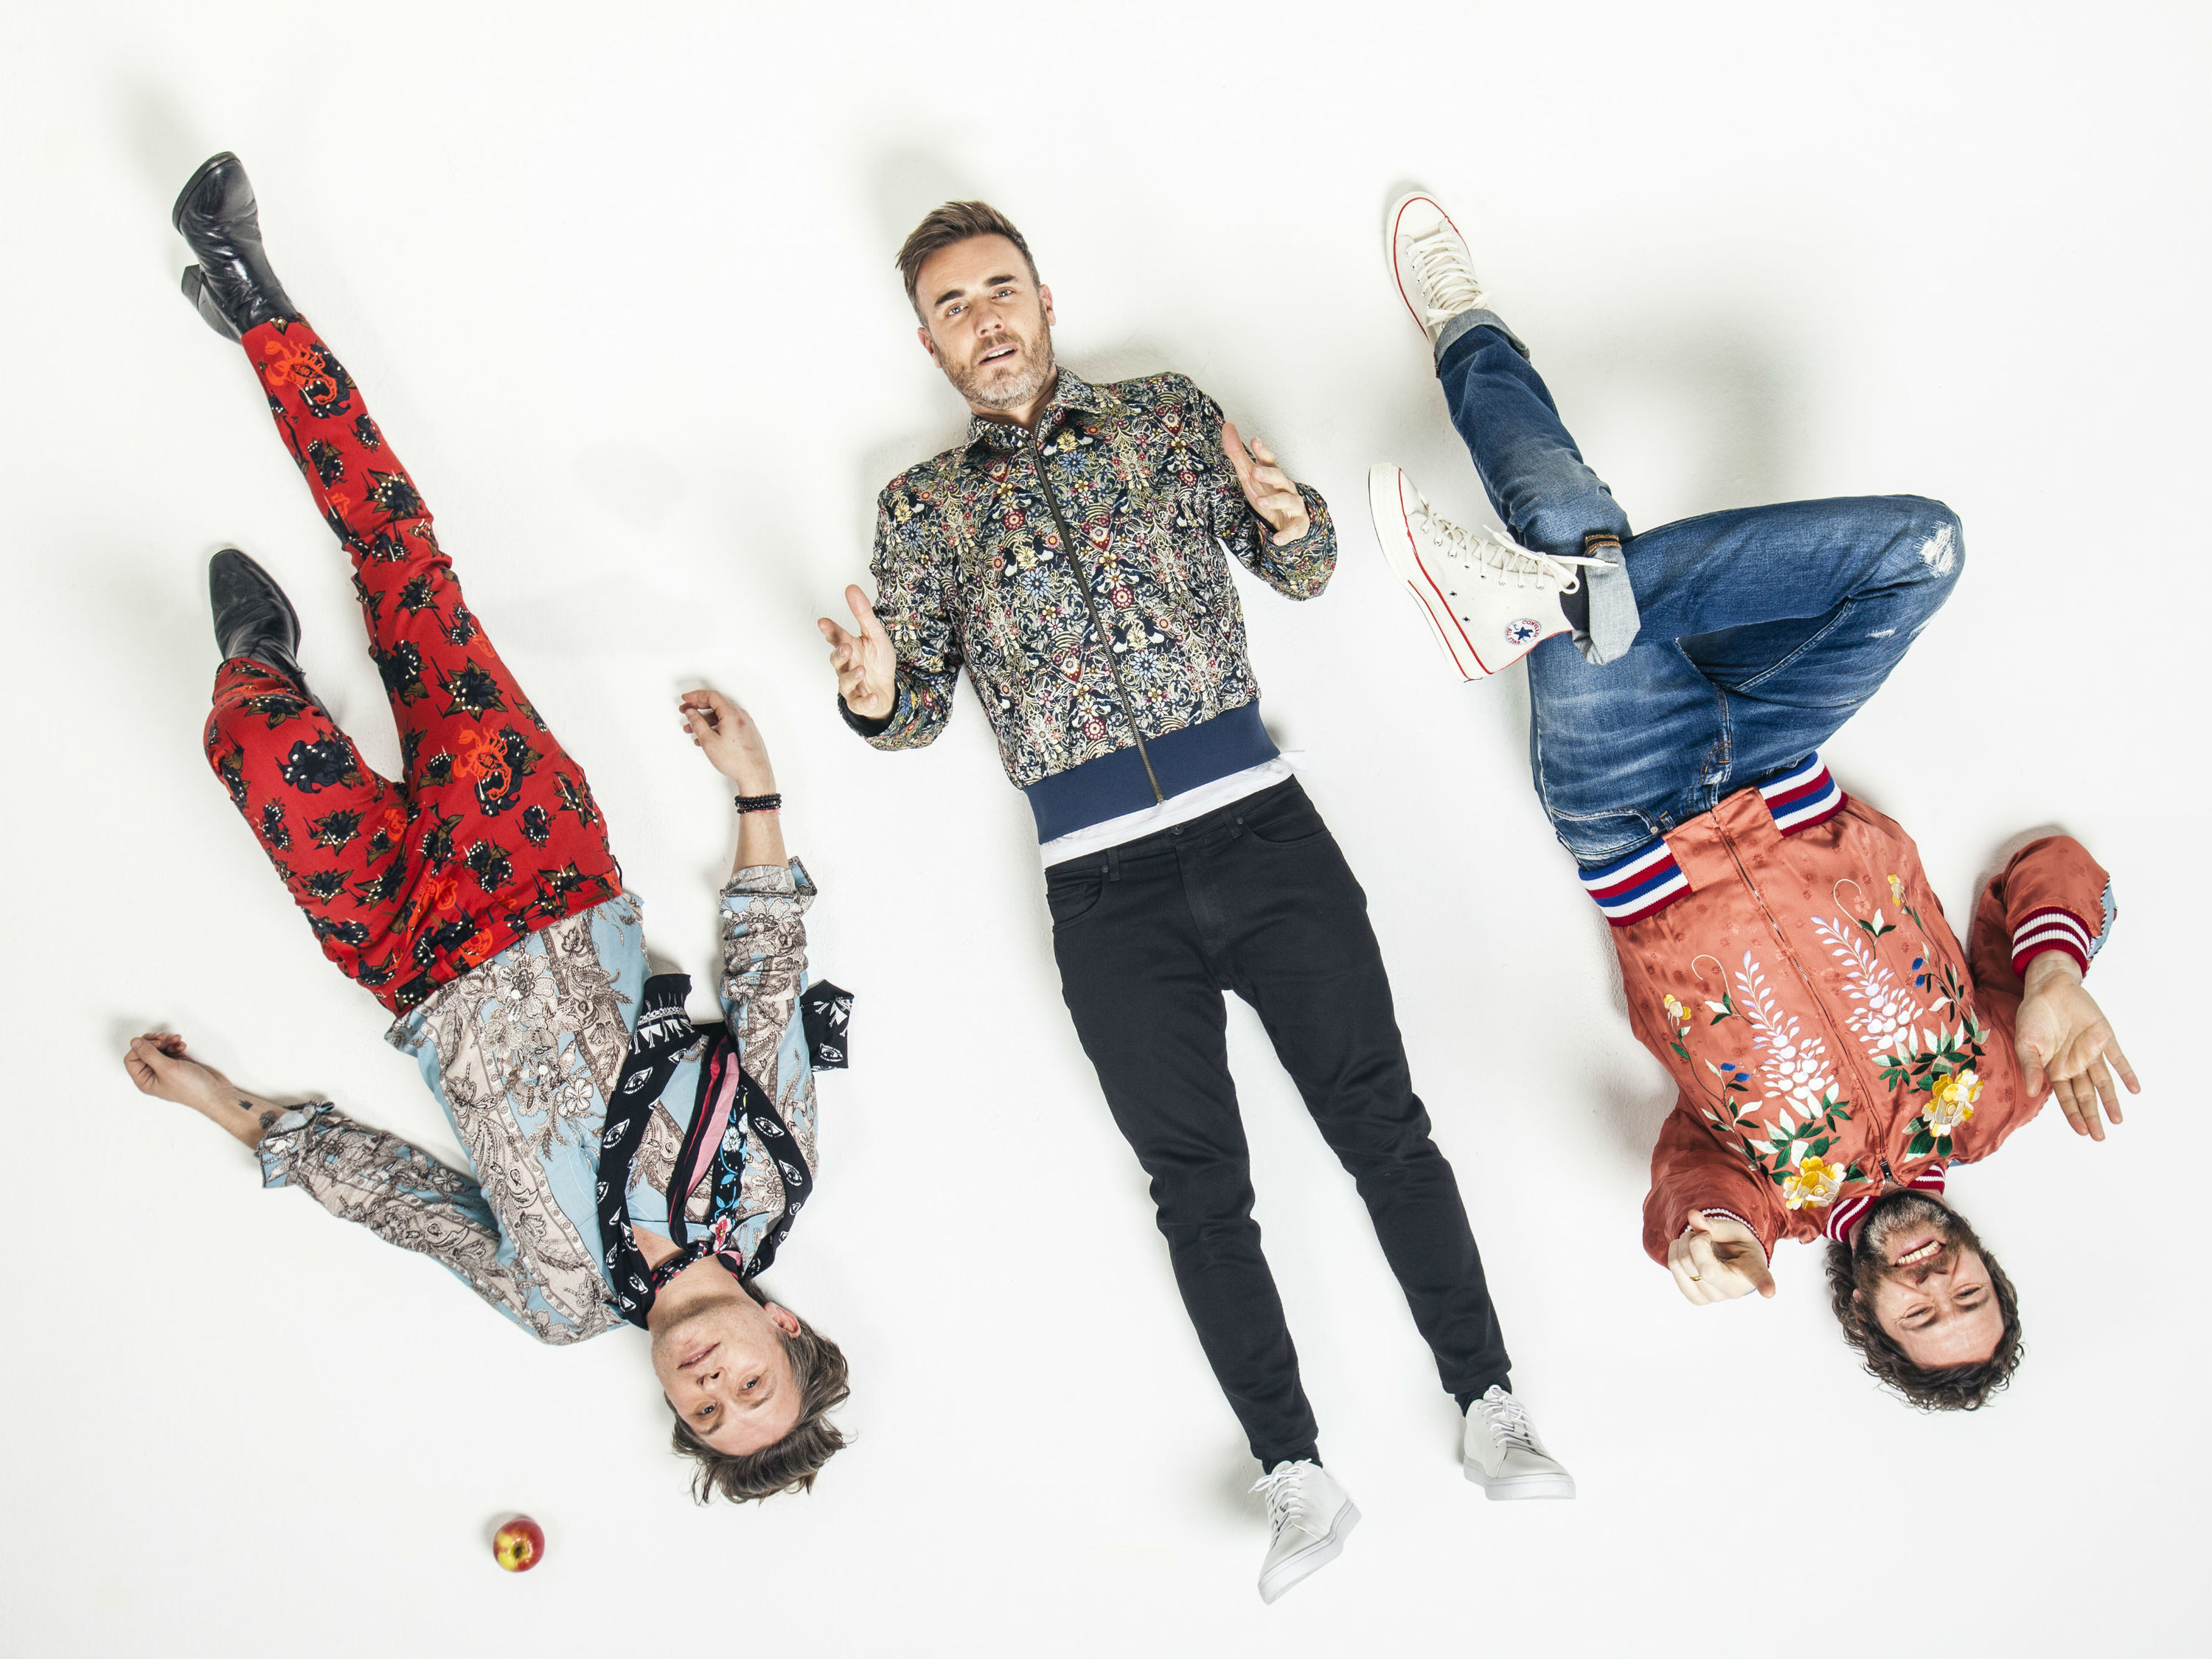 Take That are interviewed by London's mums - Time Out